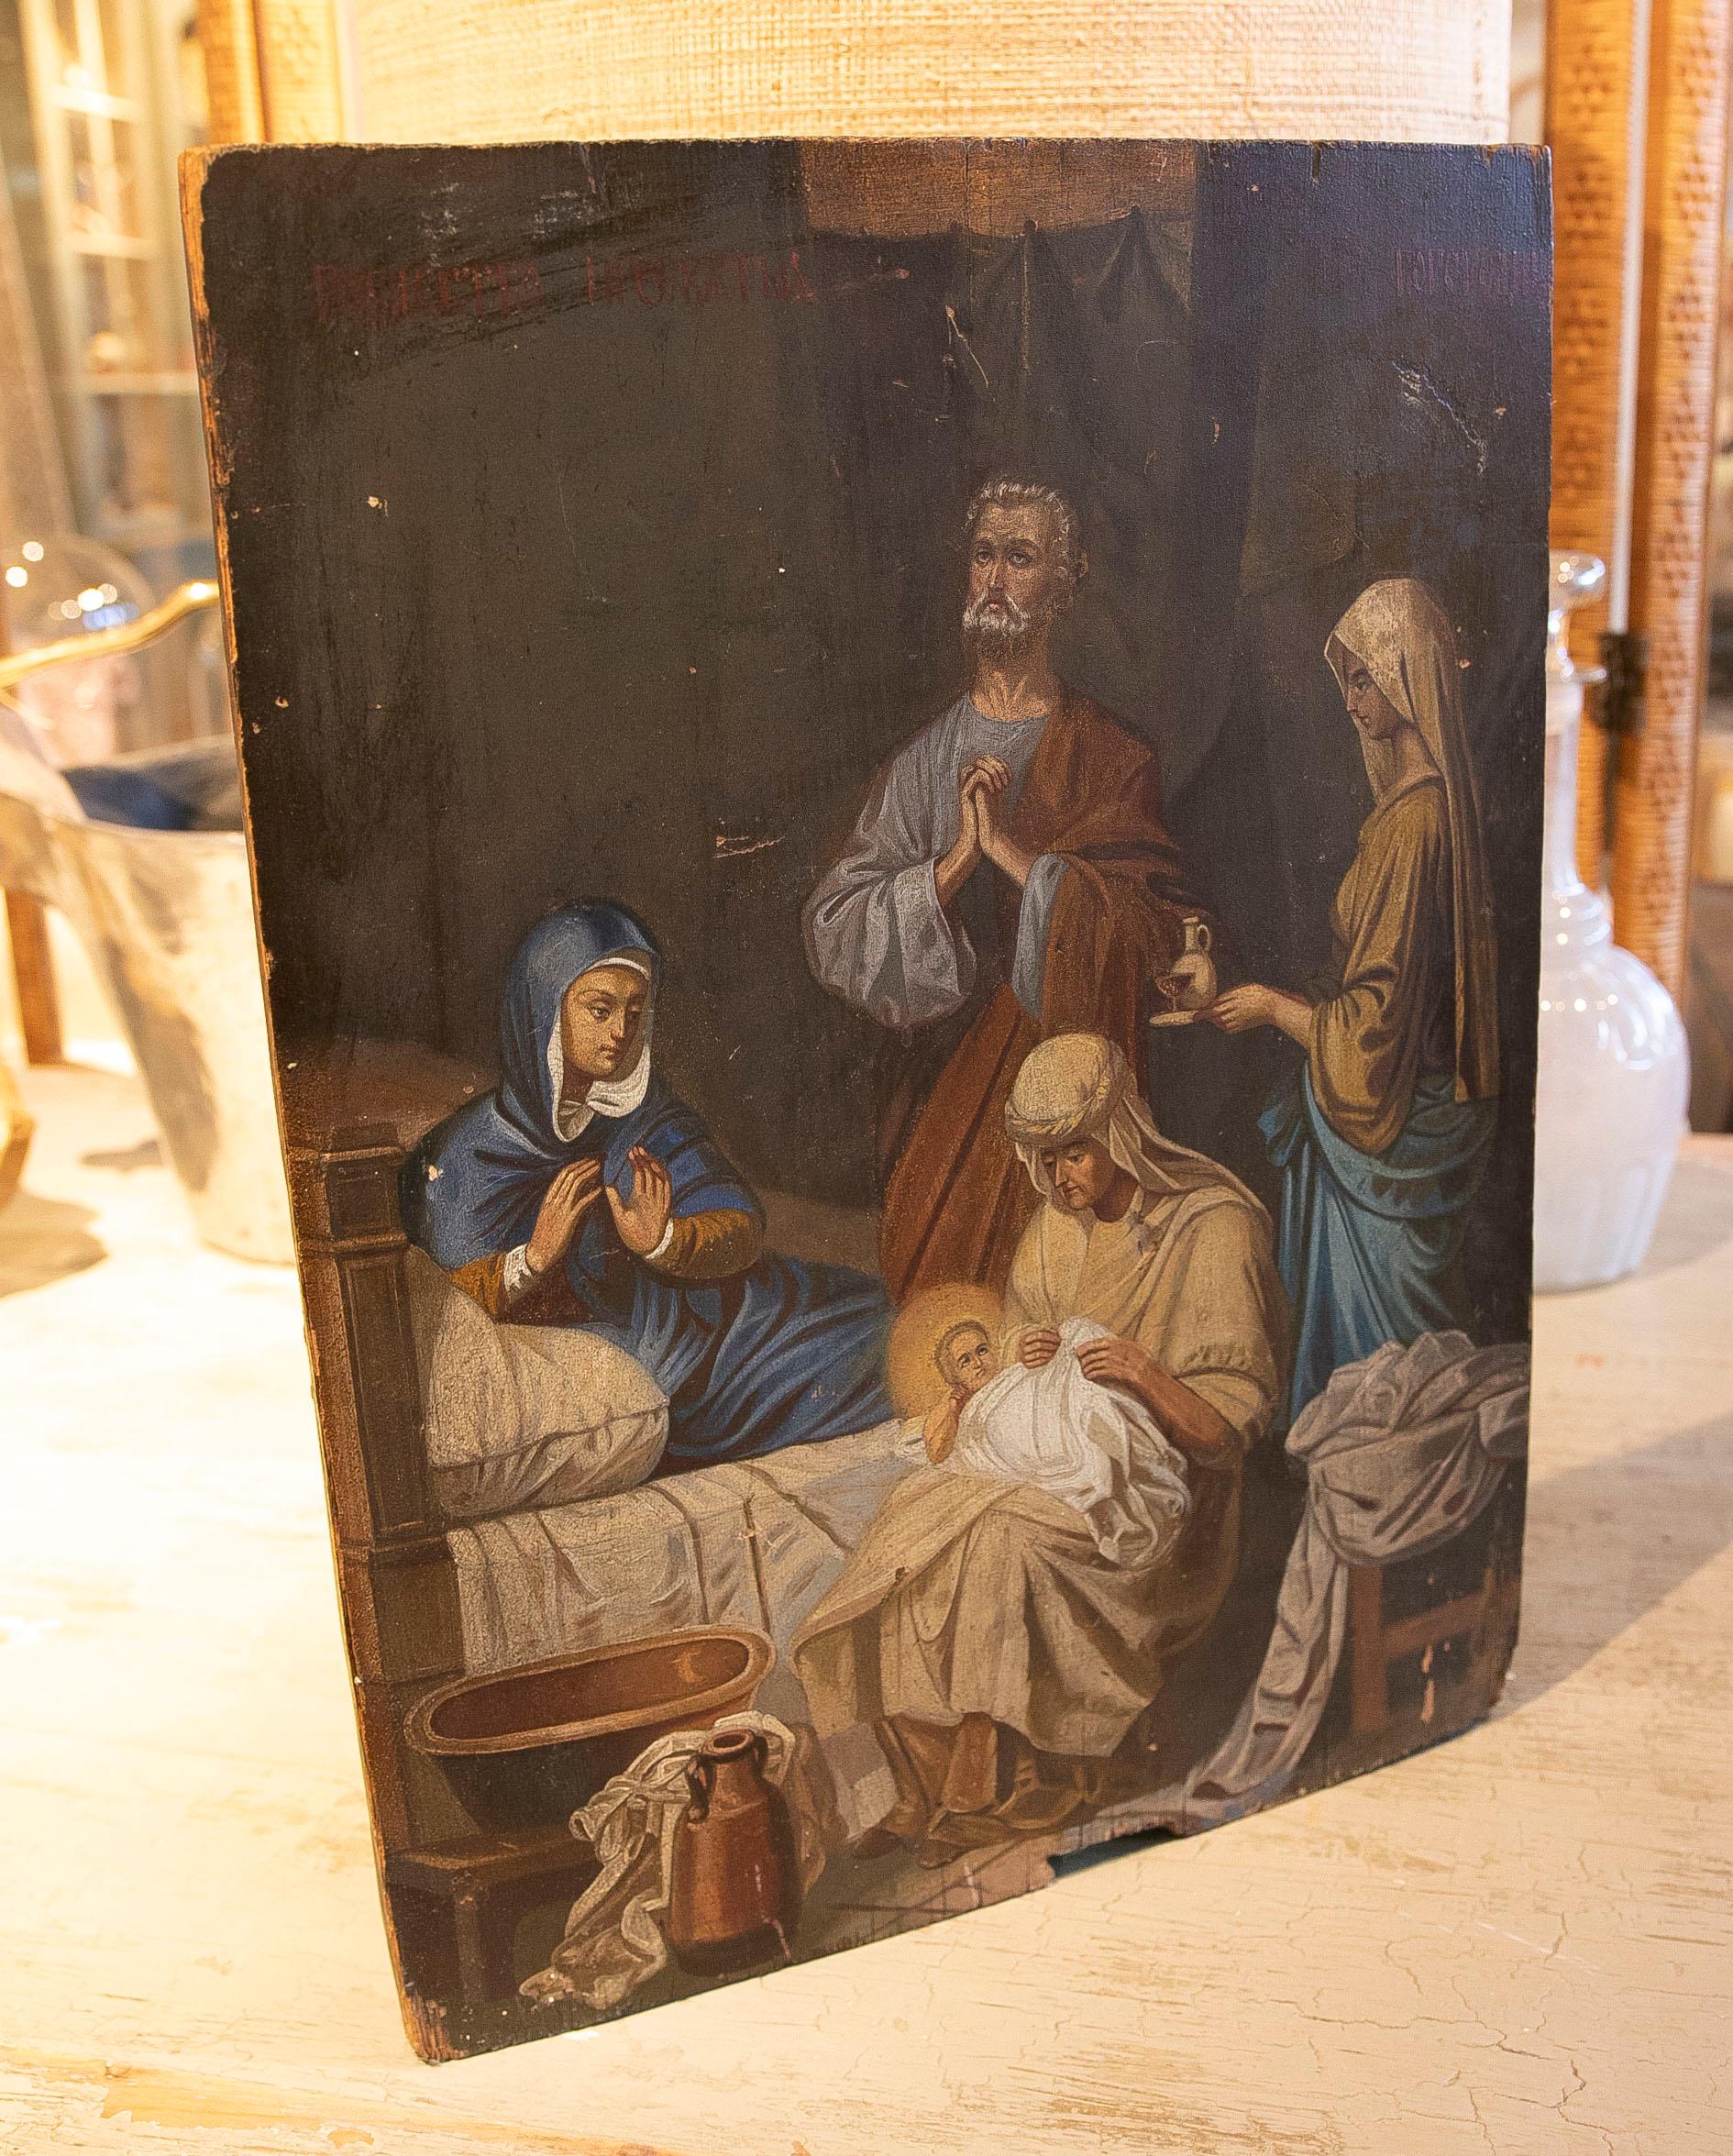 18th Century Spanish Hand-Painted Wooden Panel with Religious Scenes.
Birth of Christ